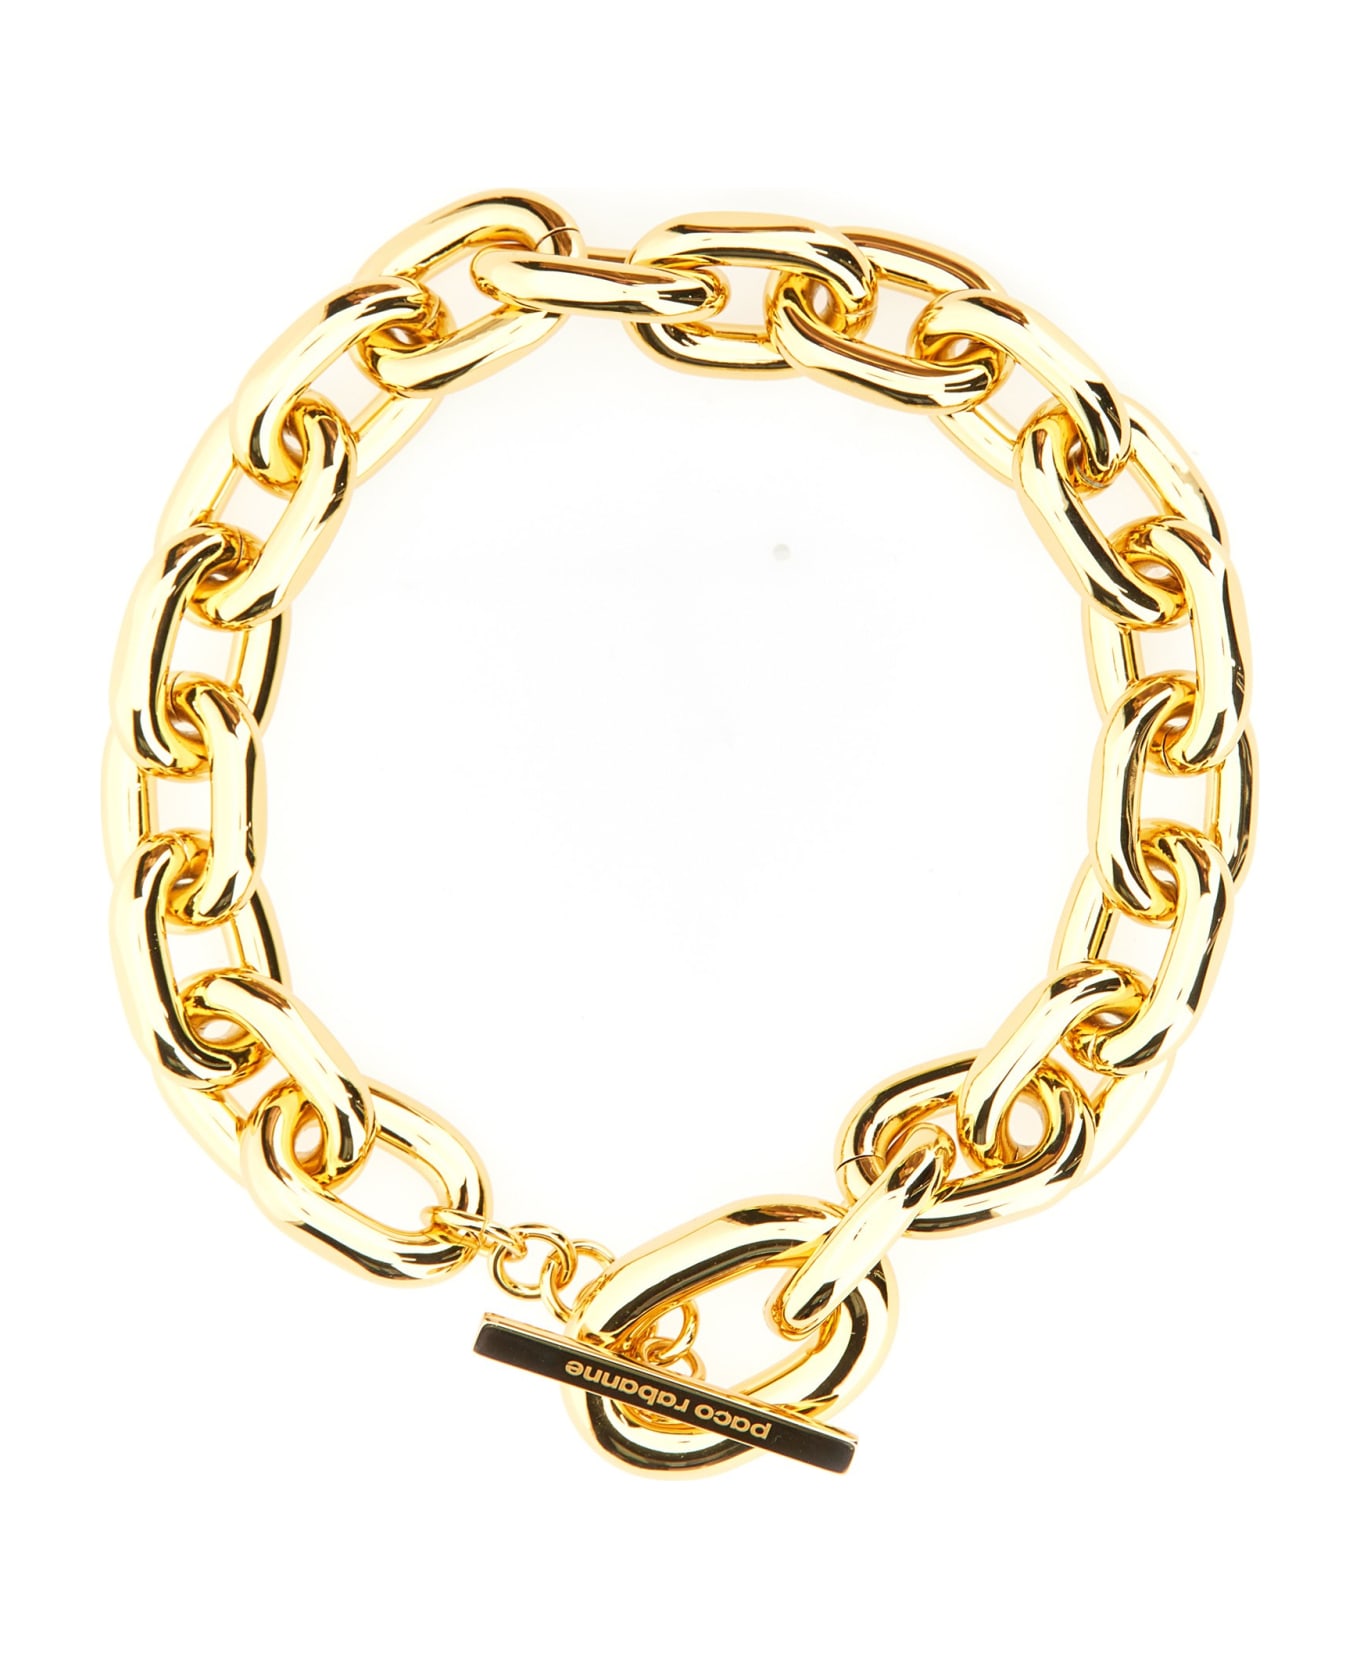 Paco Rabanne Necklace Xl Link - GOLD